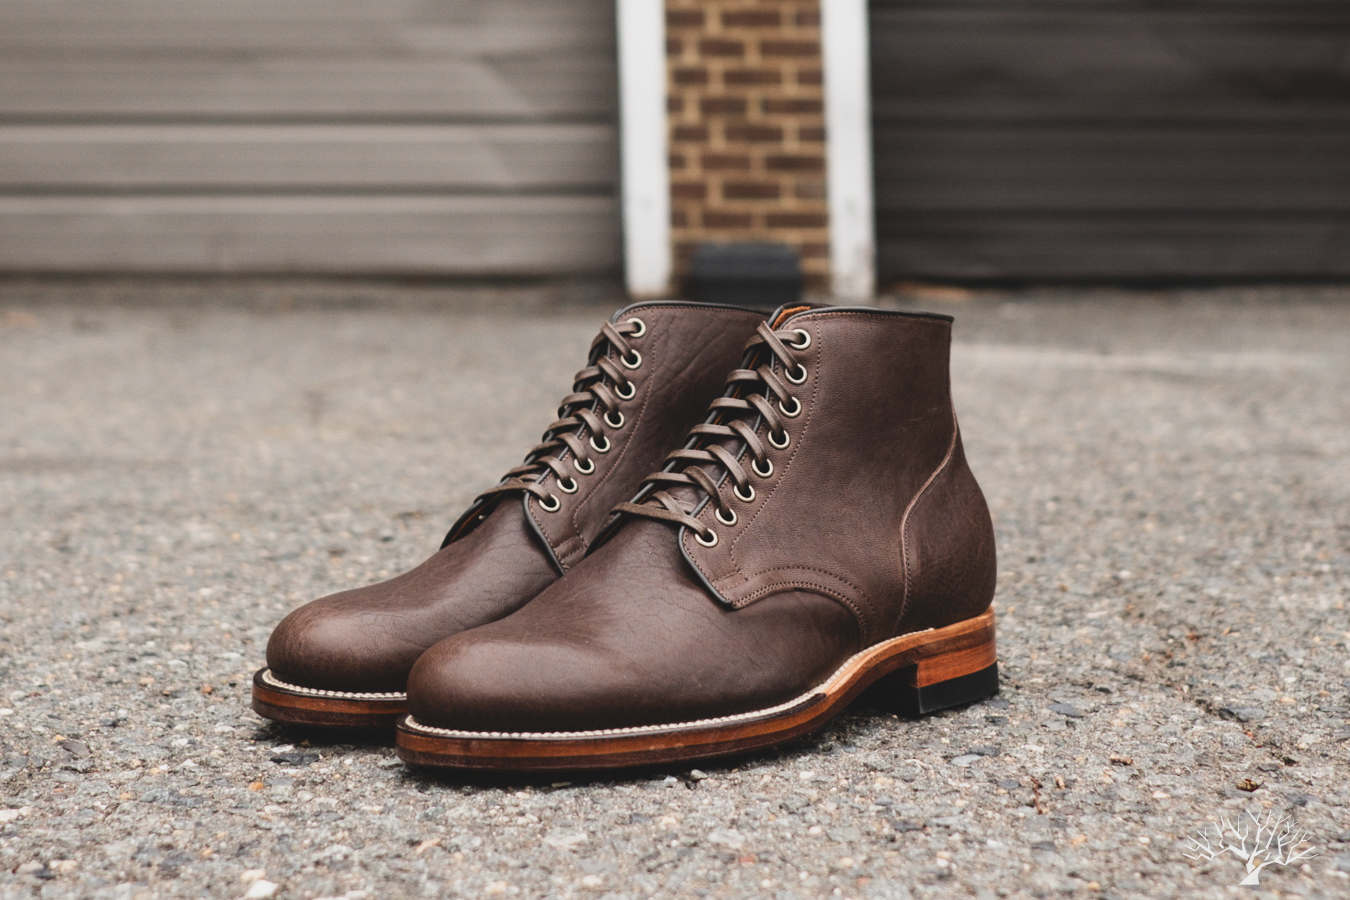 Viberg Horsehide Service Boot, Maryam Col. 1071 Washed Horsehide, Double Leather Sole